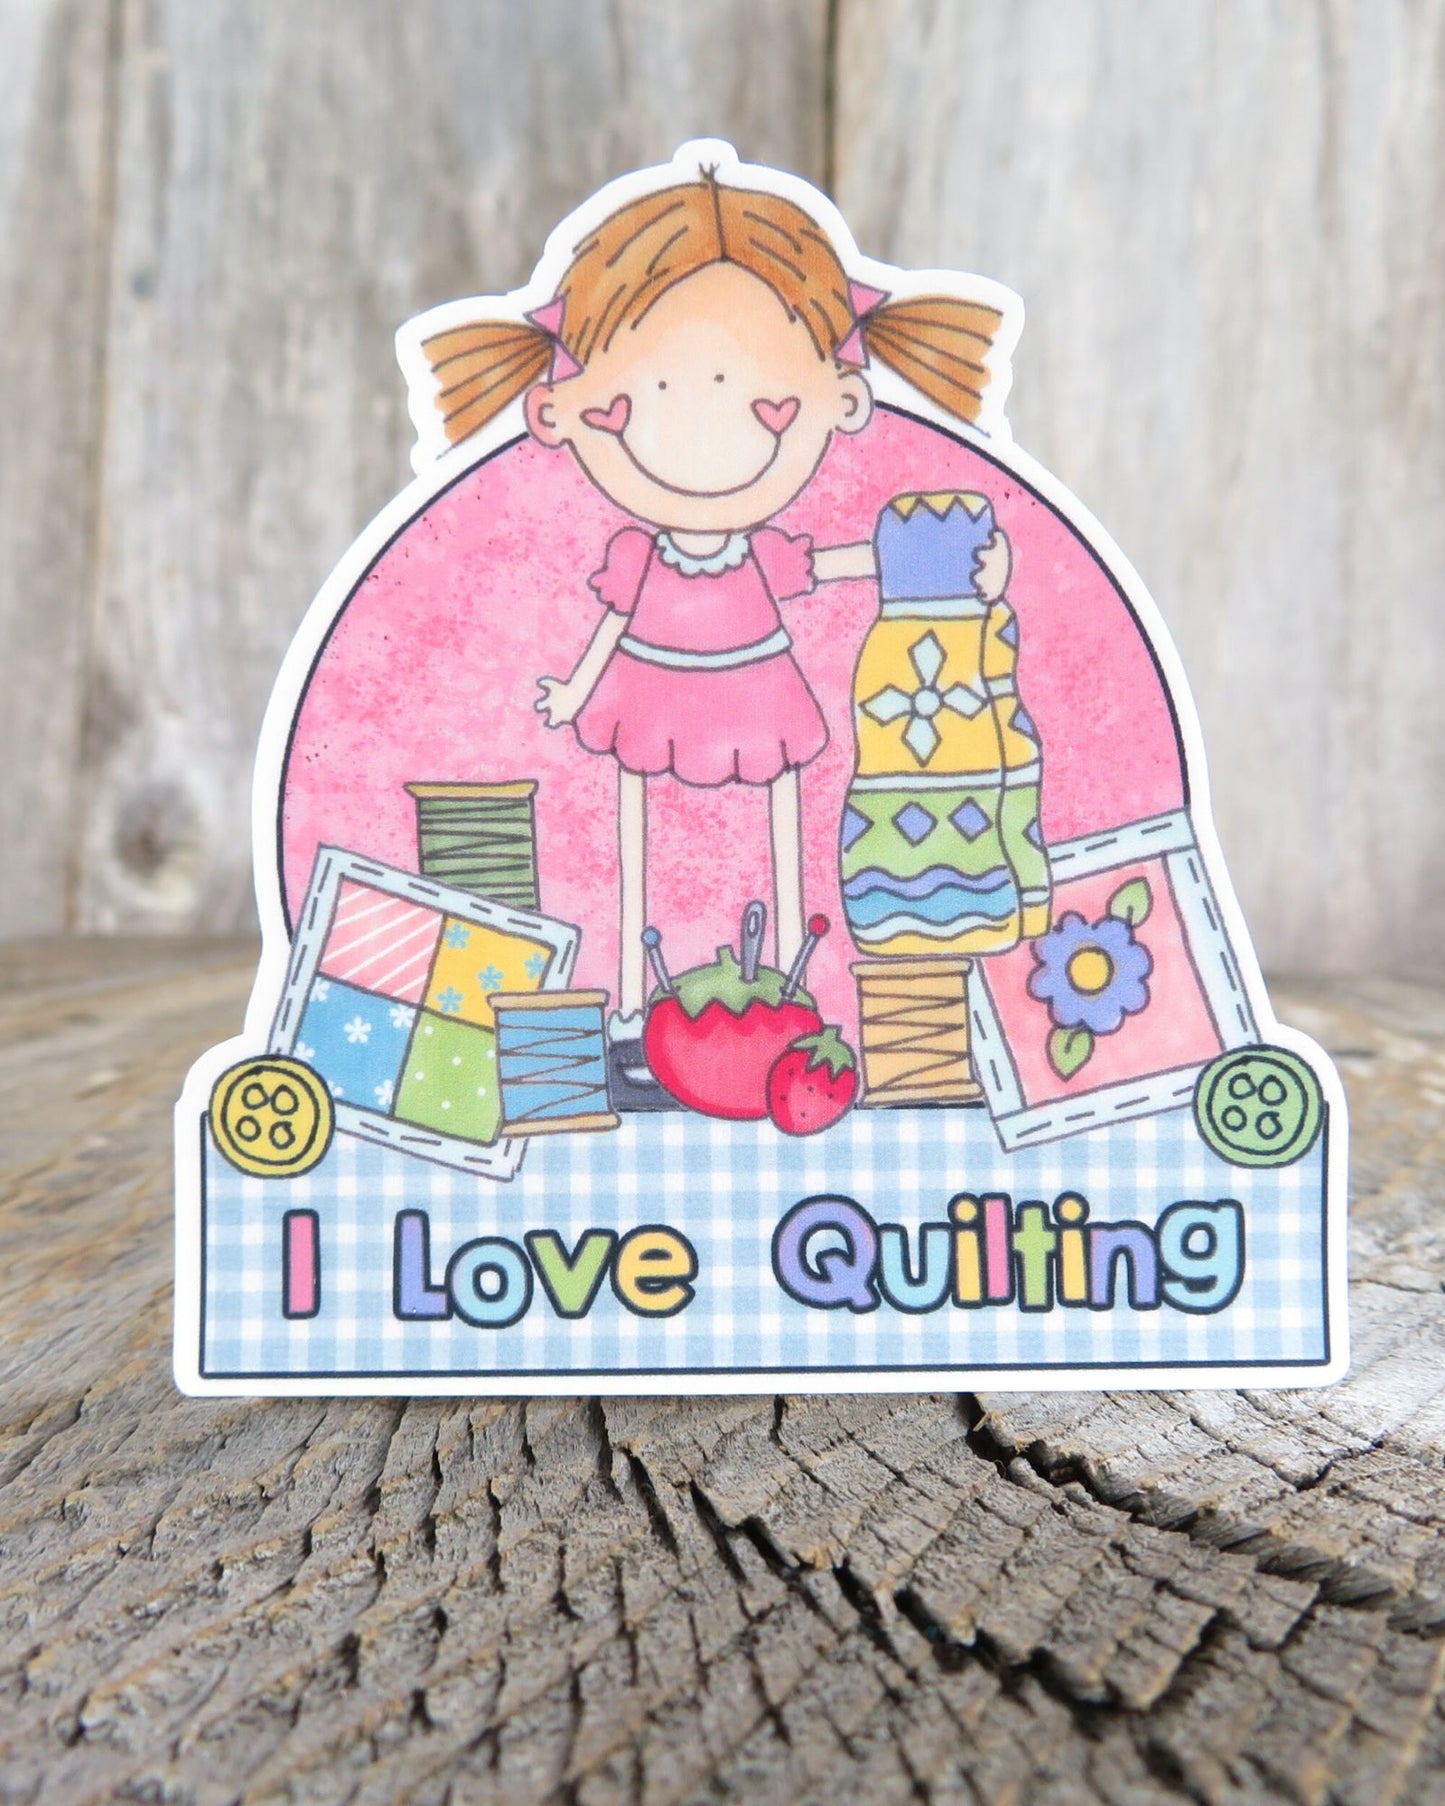 I Love Quilting Sticker Waterproof Pink Blue Country Style Gingham Full Color Waterproof Sewing Lady Crafty